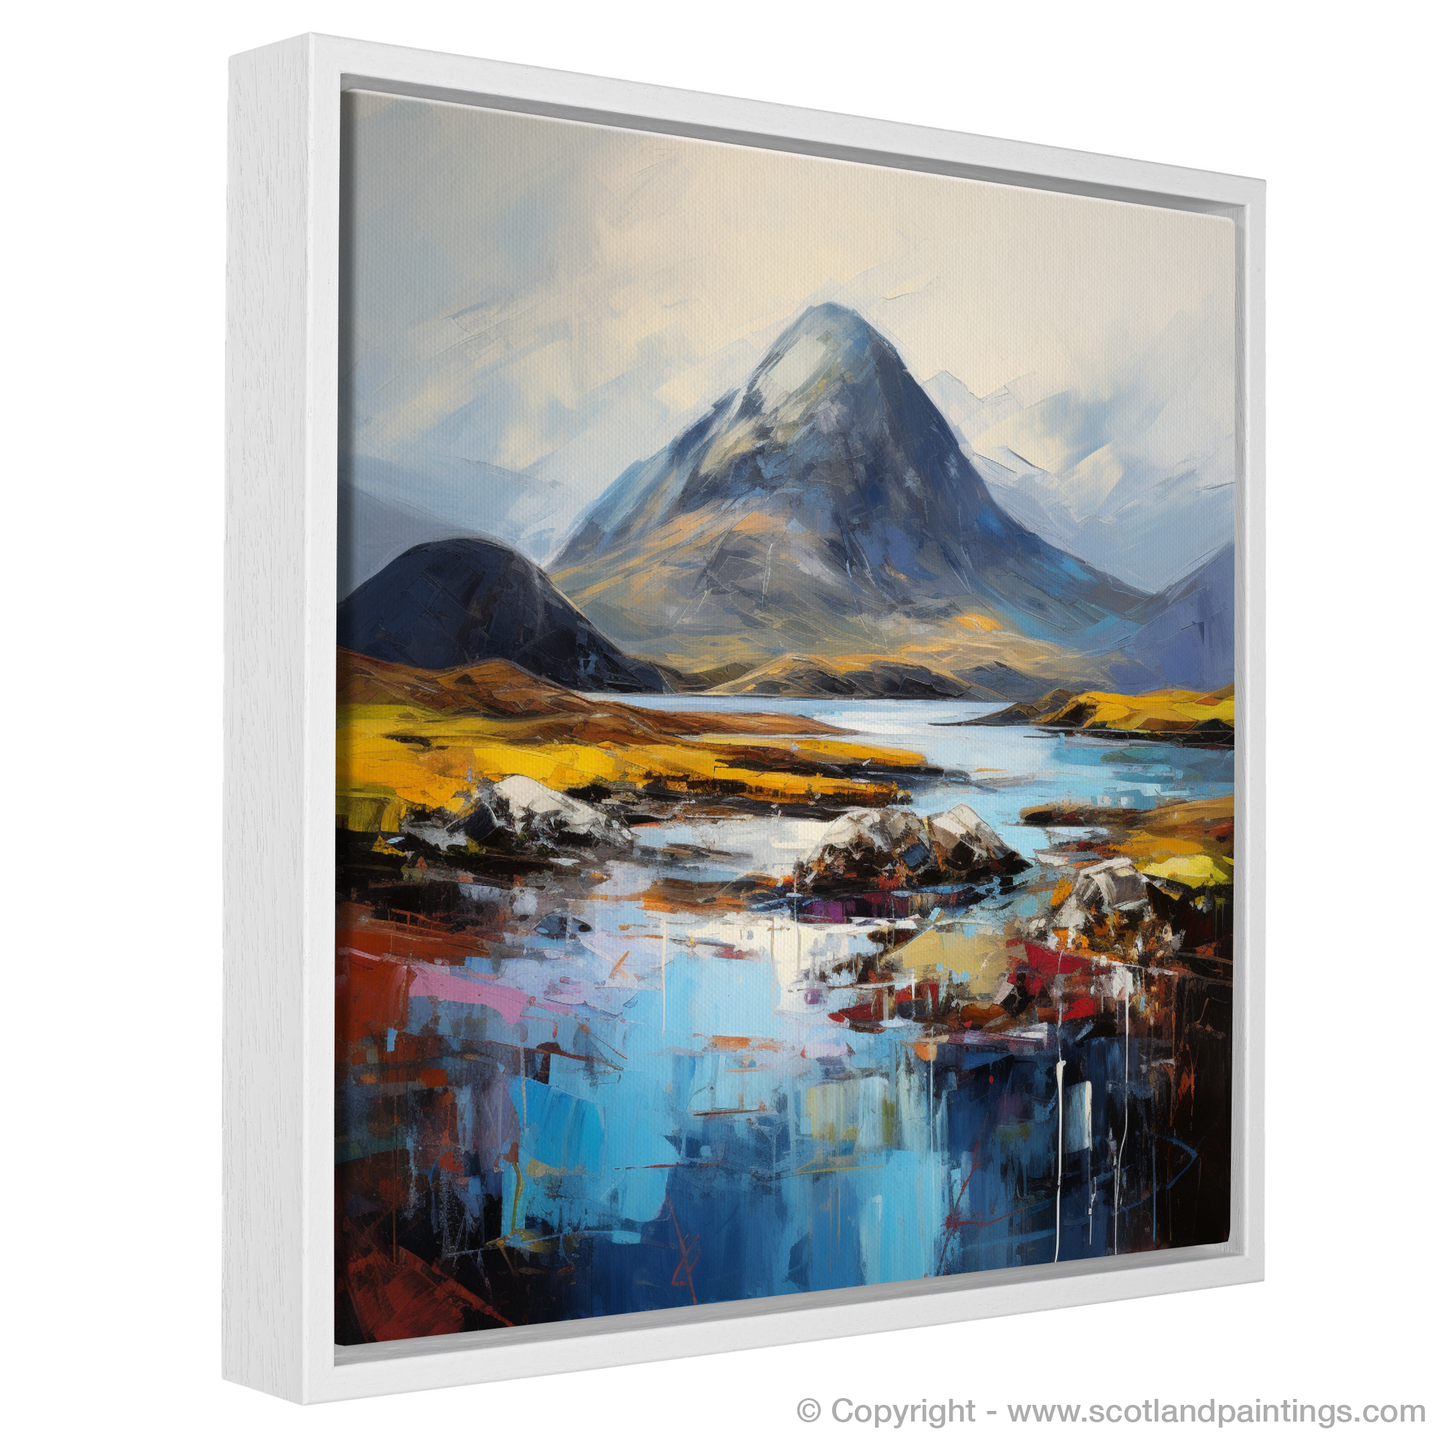 Painting and Art Print of Beinn Alligin, Wester Ross entitled "Majestic Beinn Alligin: An Expressionist Ode to the Scottish Highlands".